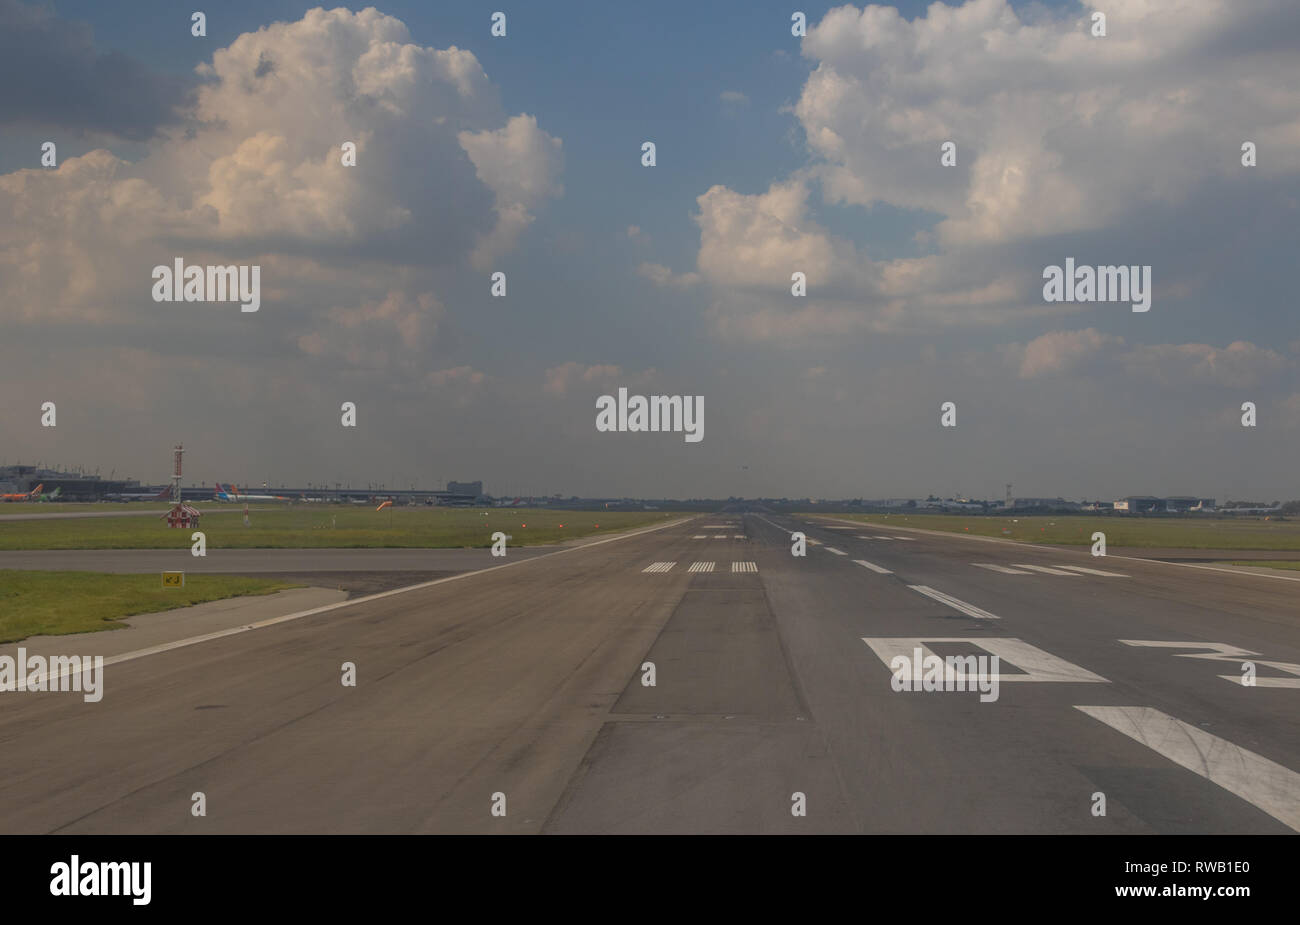 Johannesburg, South Africa - on the apron and runways of OR Tambo International Airport in the city image in landscape format Stock Photo